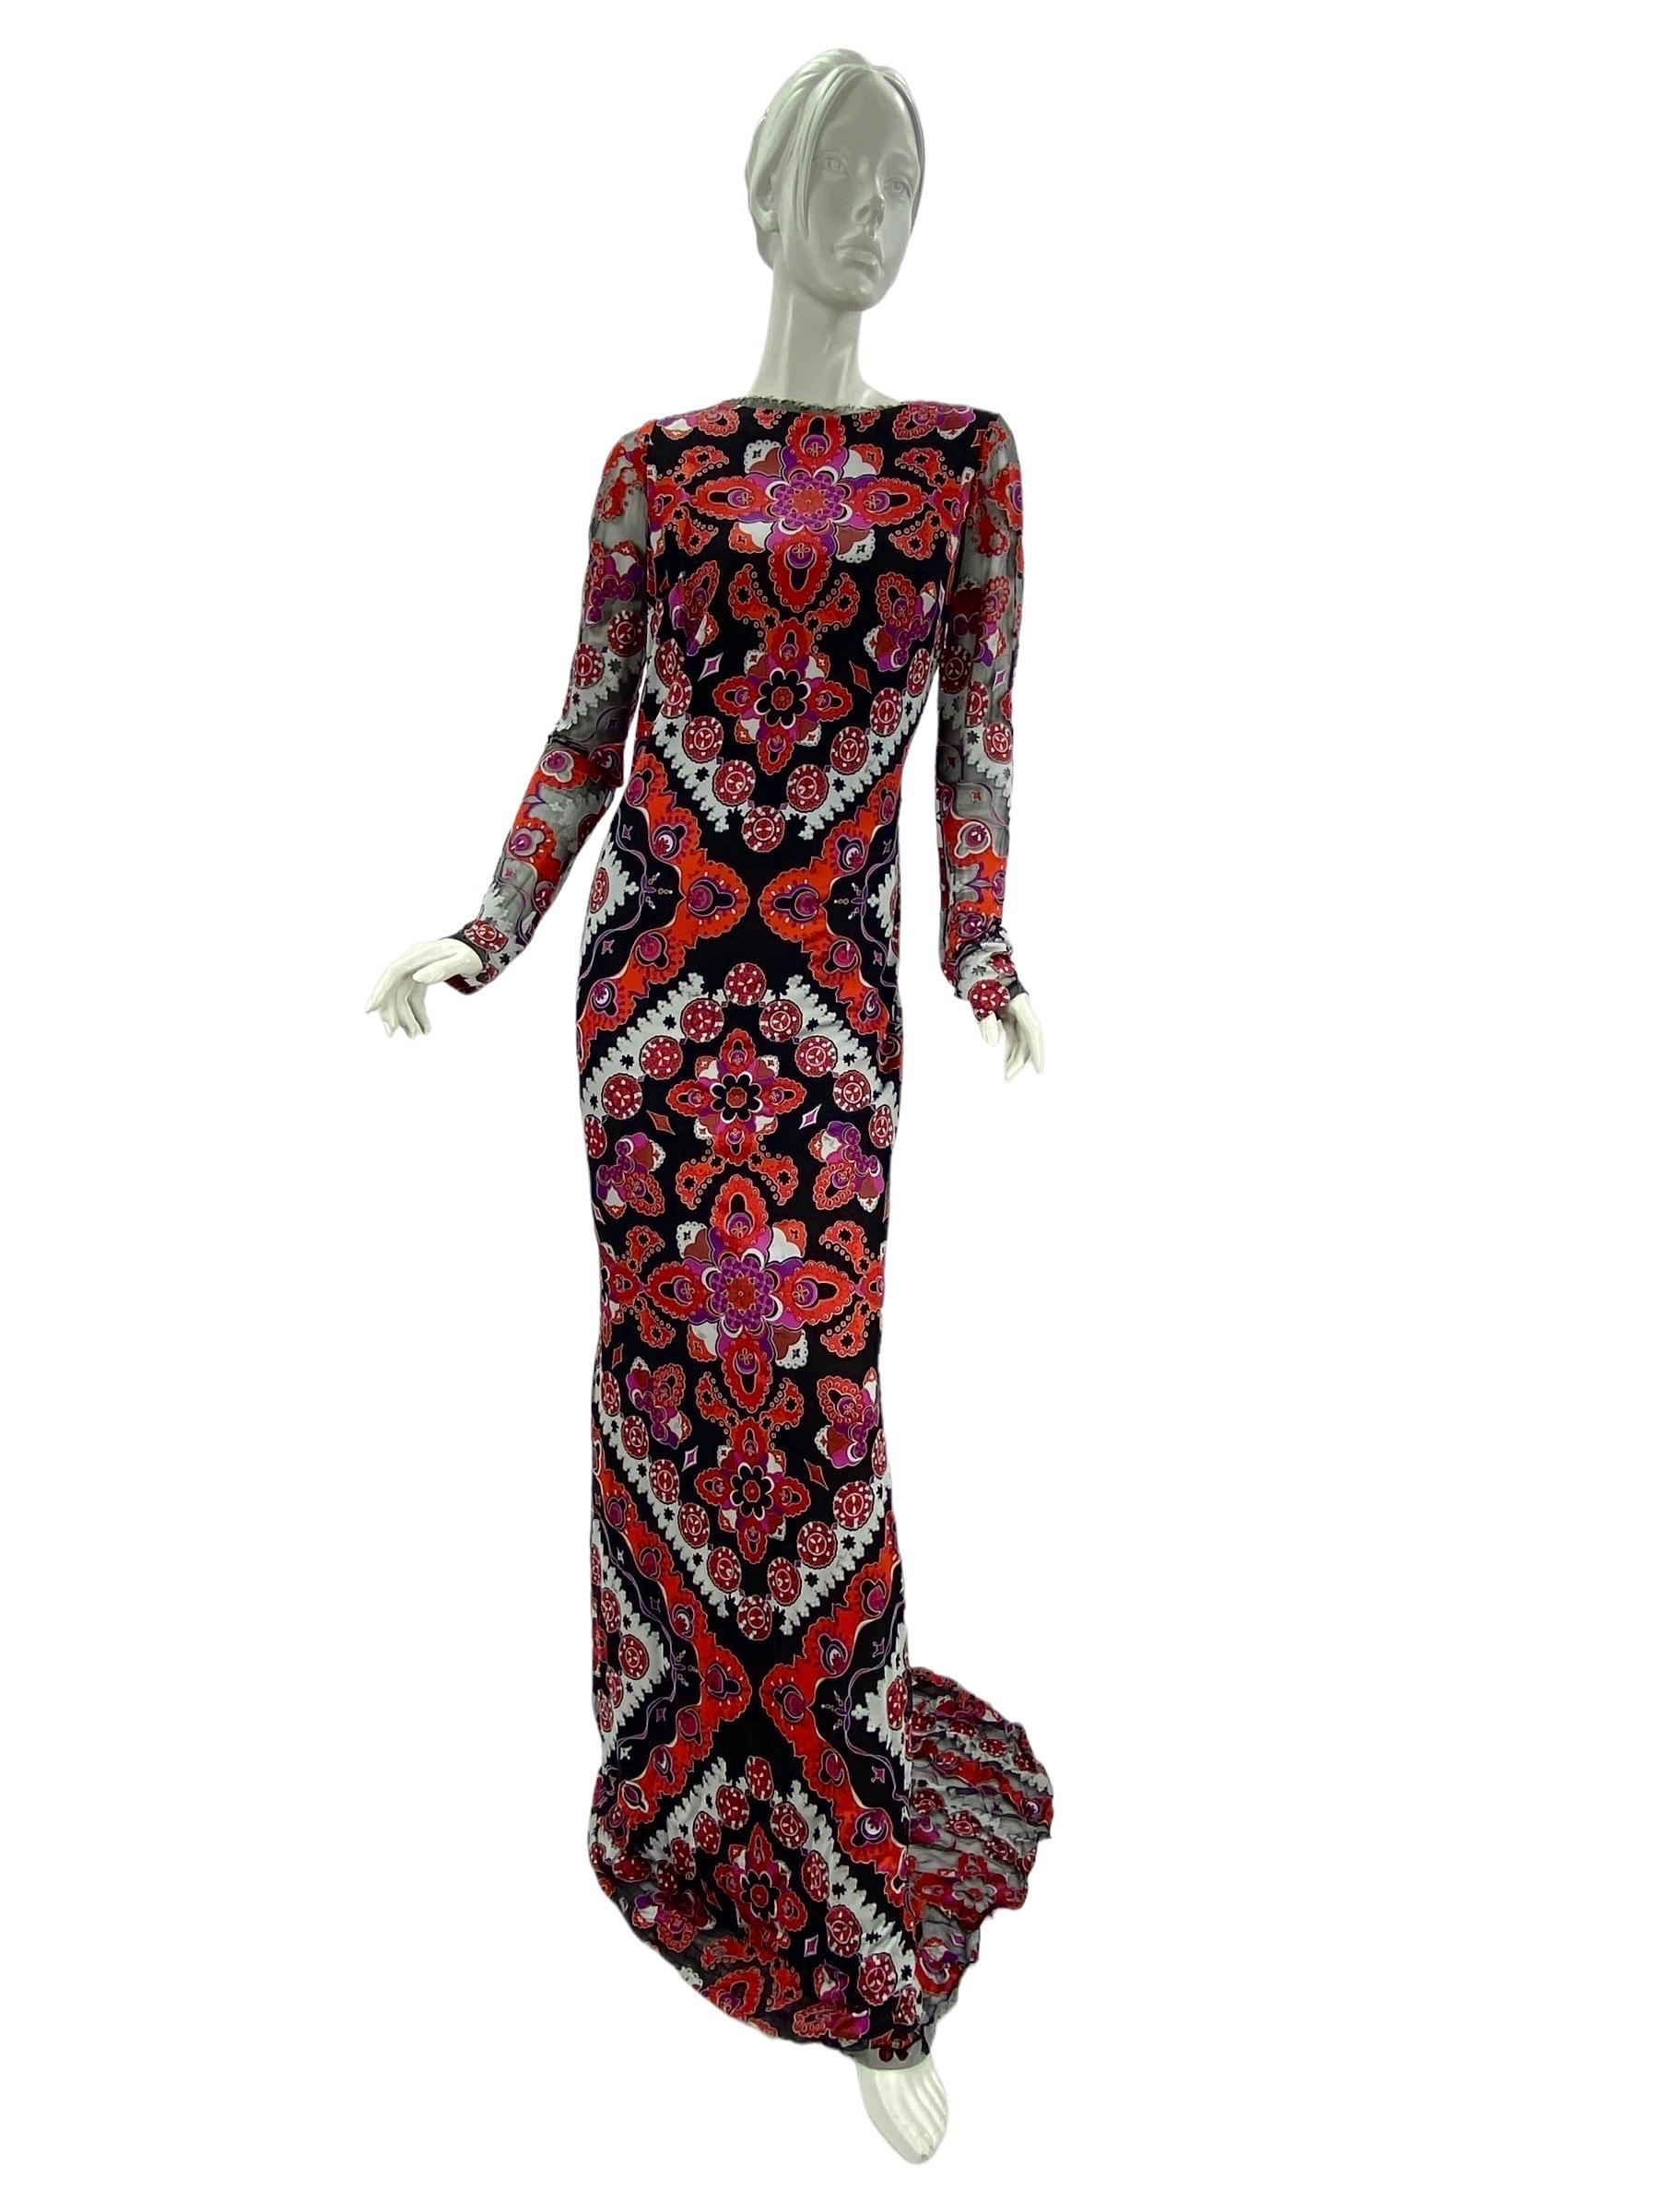 Iconic Emilio Pucci Multicolor Printed Maxi Dress
Italian Size 42, US - 6.
Devore Viscose Jersey Dress
Snap button closure at back on neck, Open back, Long sleeves.
Made in Italy
Excellent condition.